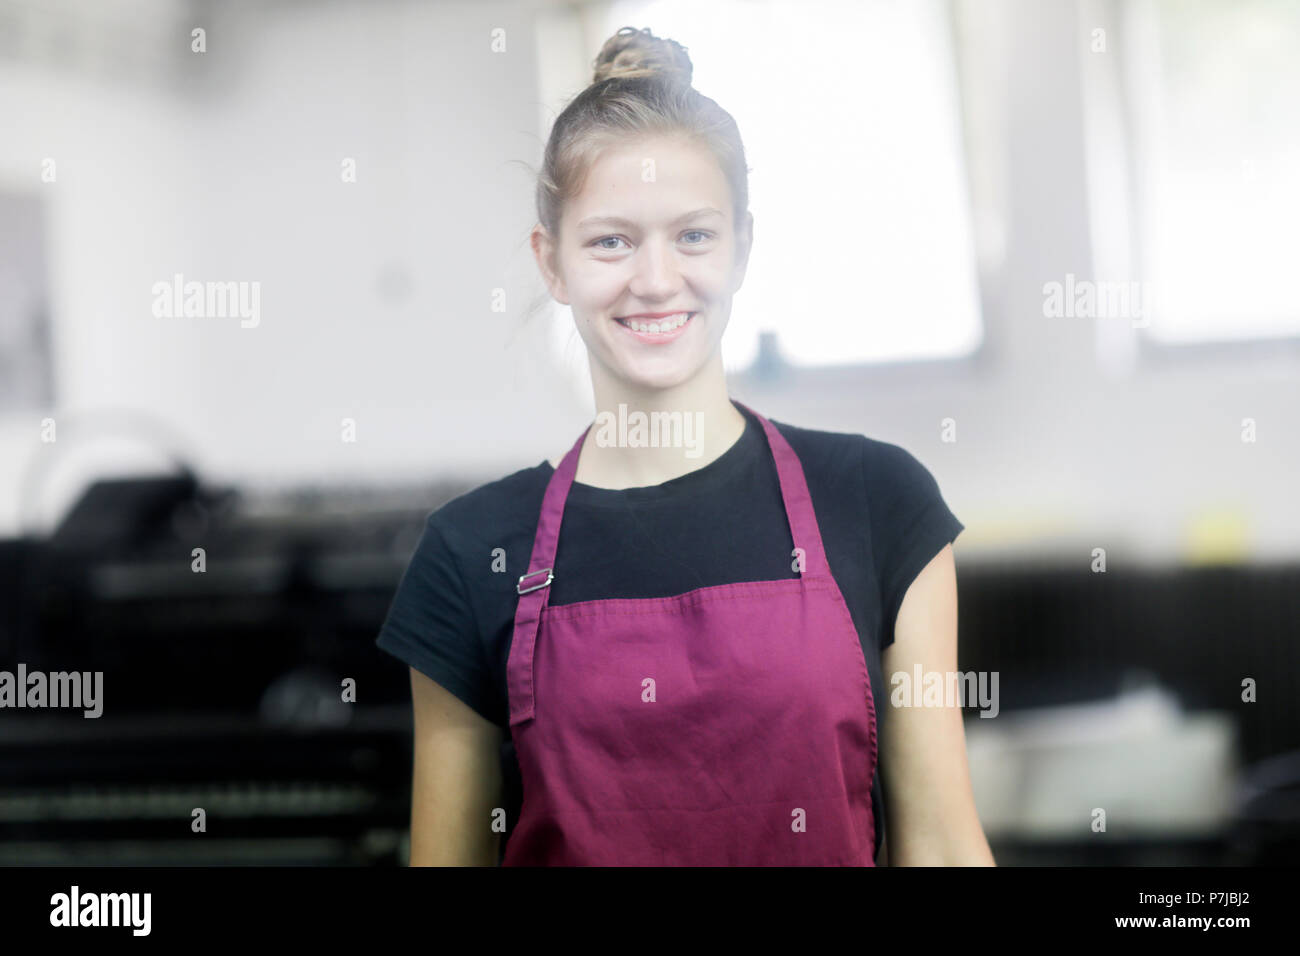 Portrait of a smiling woman in a factory Stock Photo